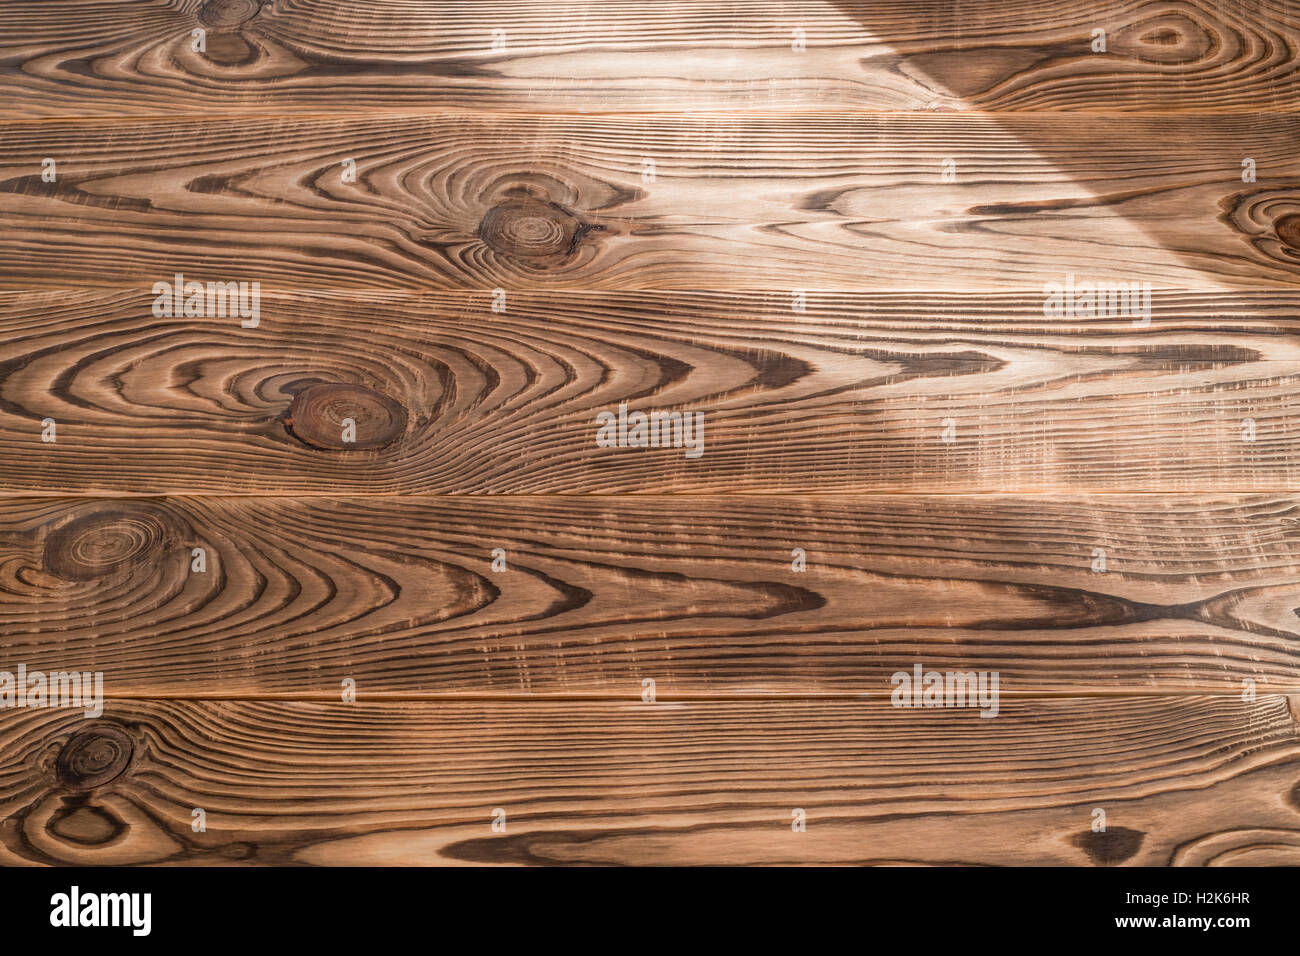 Brown aged natural wood texture Stock Photo